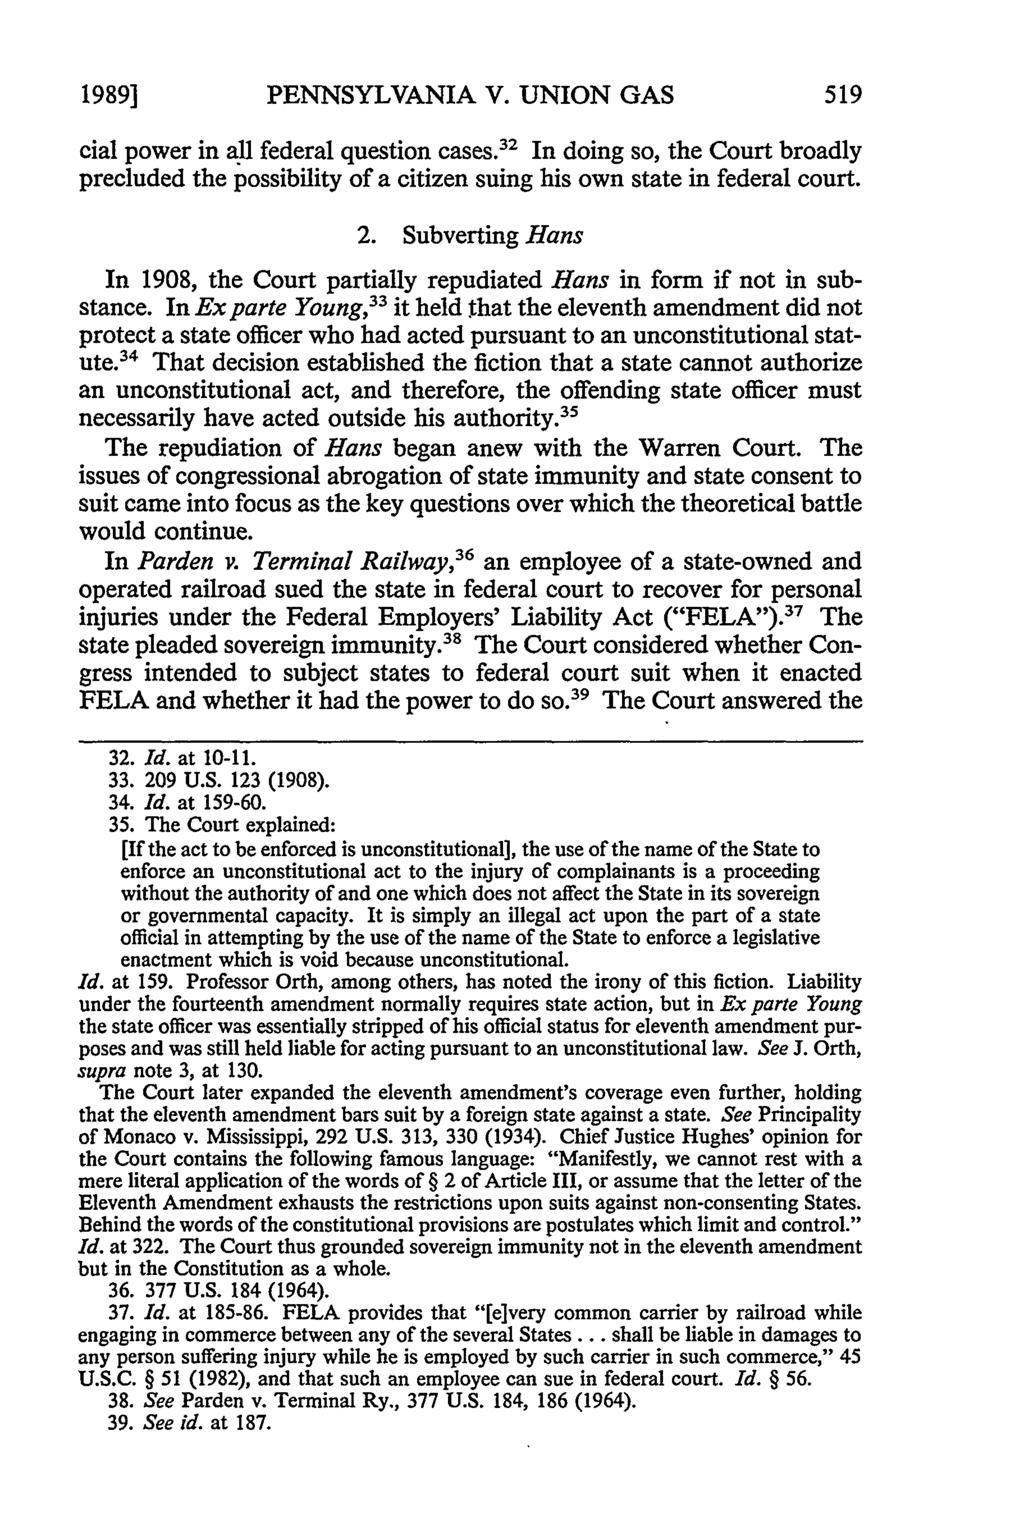 1989] PENNSYLVANIA V. UNION GAS cial power in all federal question cases. 3 2 In doing so, the Court broadly precluded the possibility of a citizen suing his own state in federal court. 2. Subverting Hans In 1908, the Court partially repudiated Hans in form if not in substance.